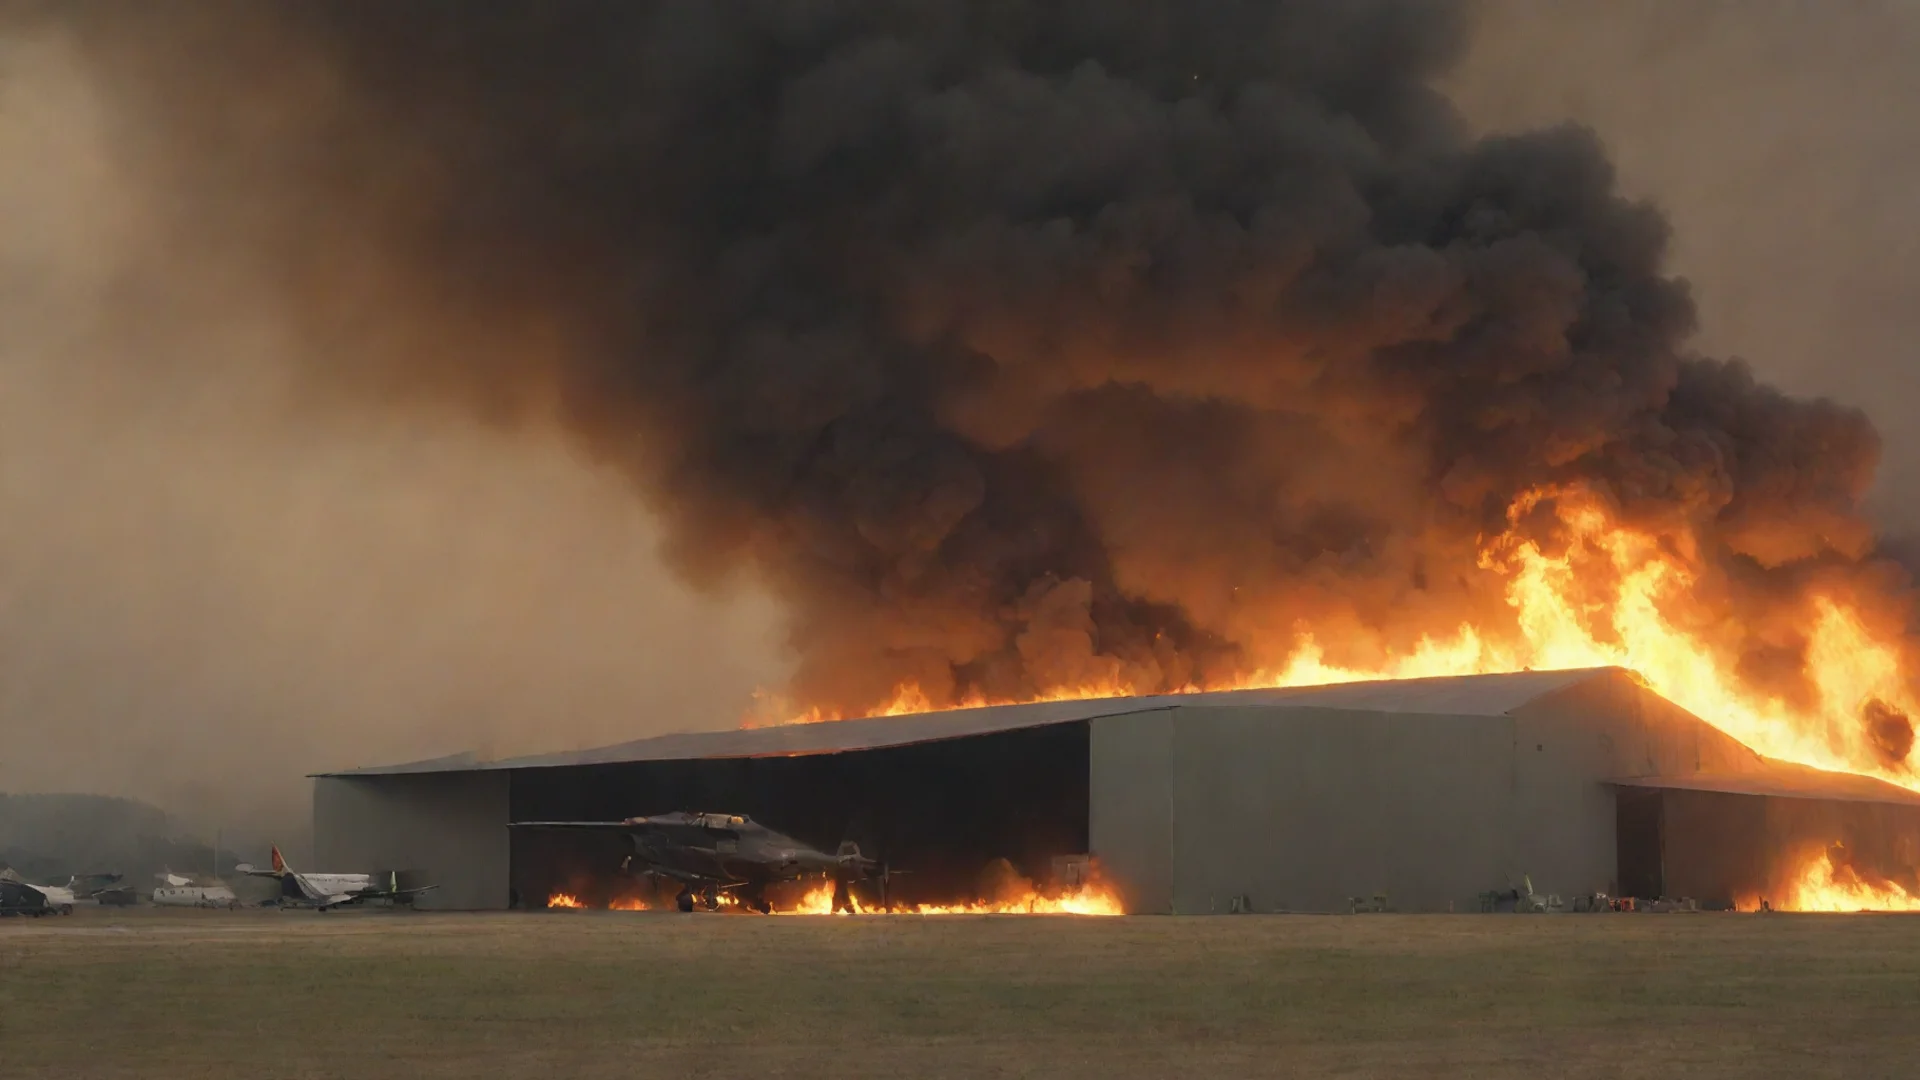 aiamazing burning hangar with huge new aurplane in front awesome portrait 2 wide